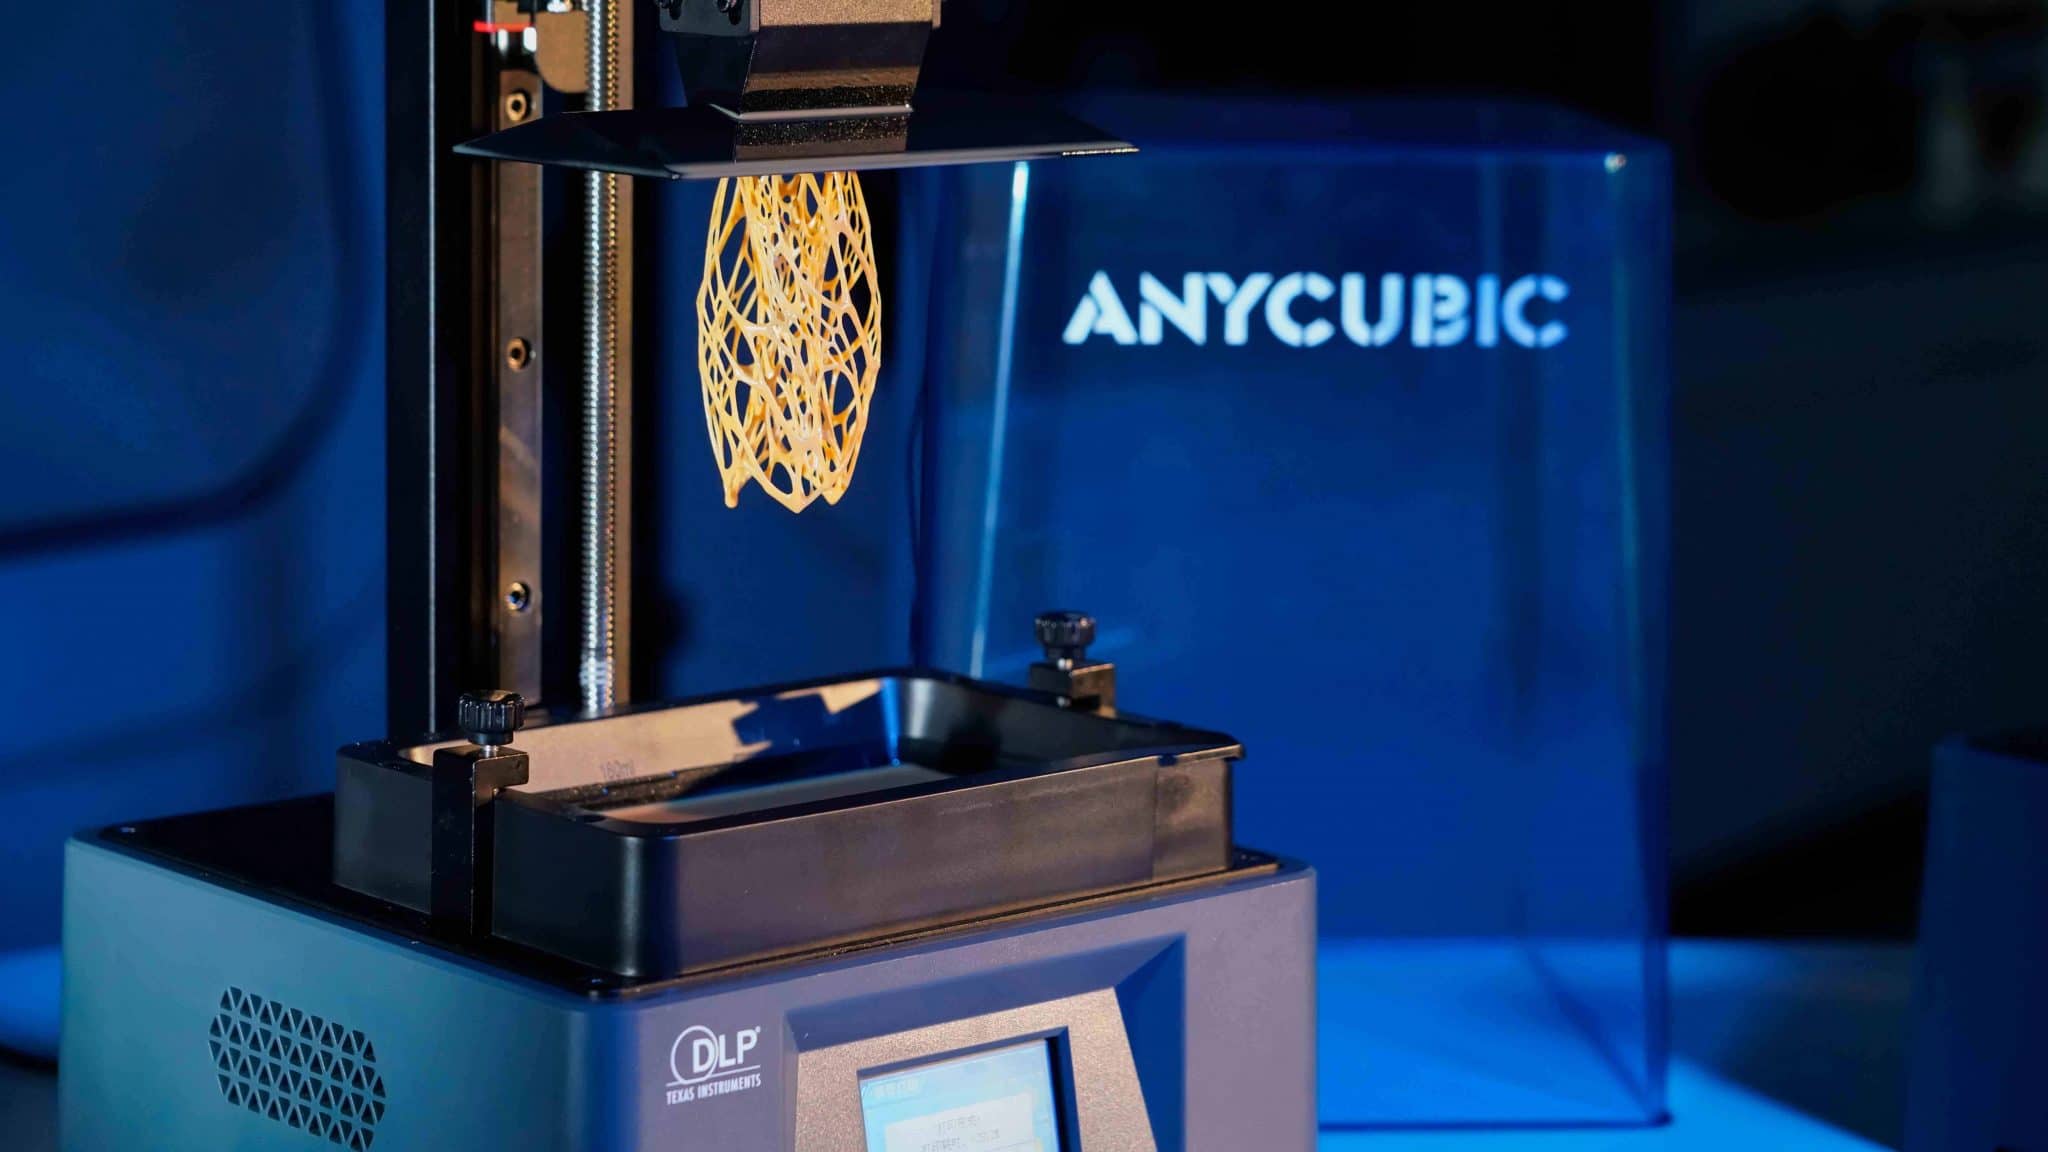 New TI DLP Pico Chipset Makes DLP 3D Printing More Affordable